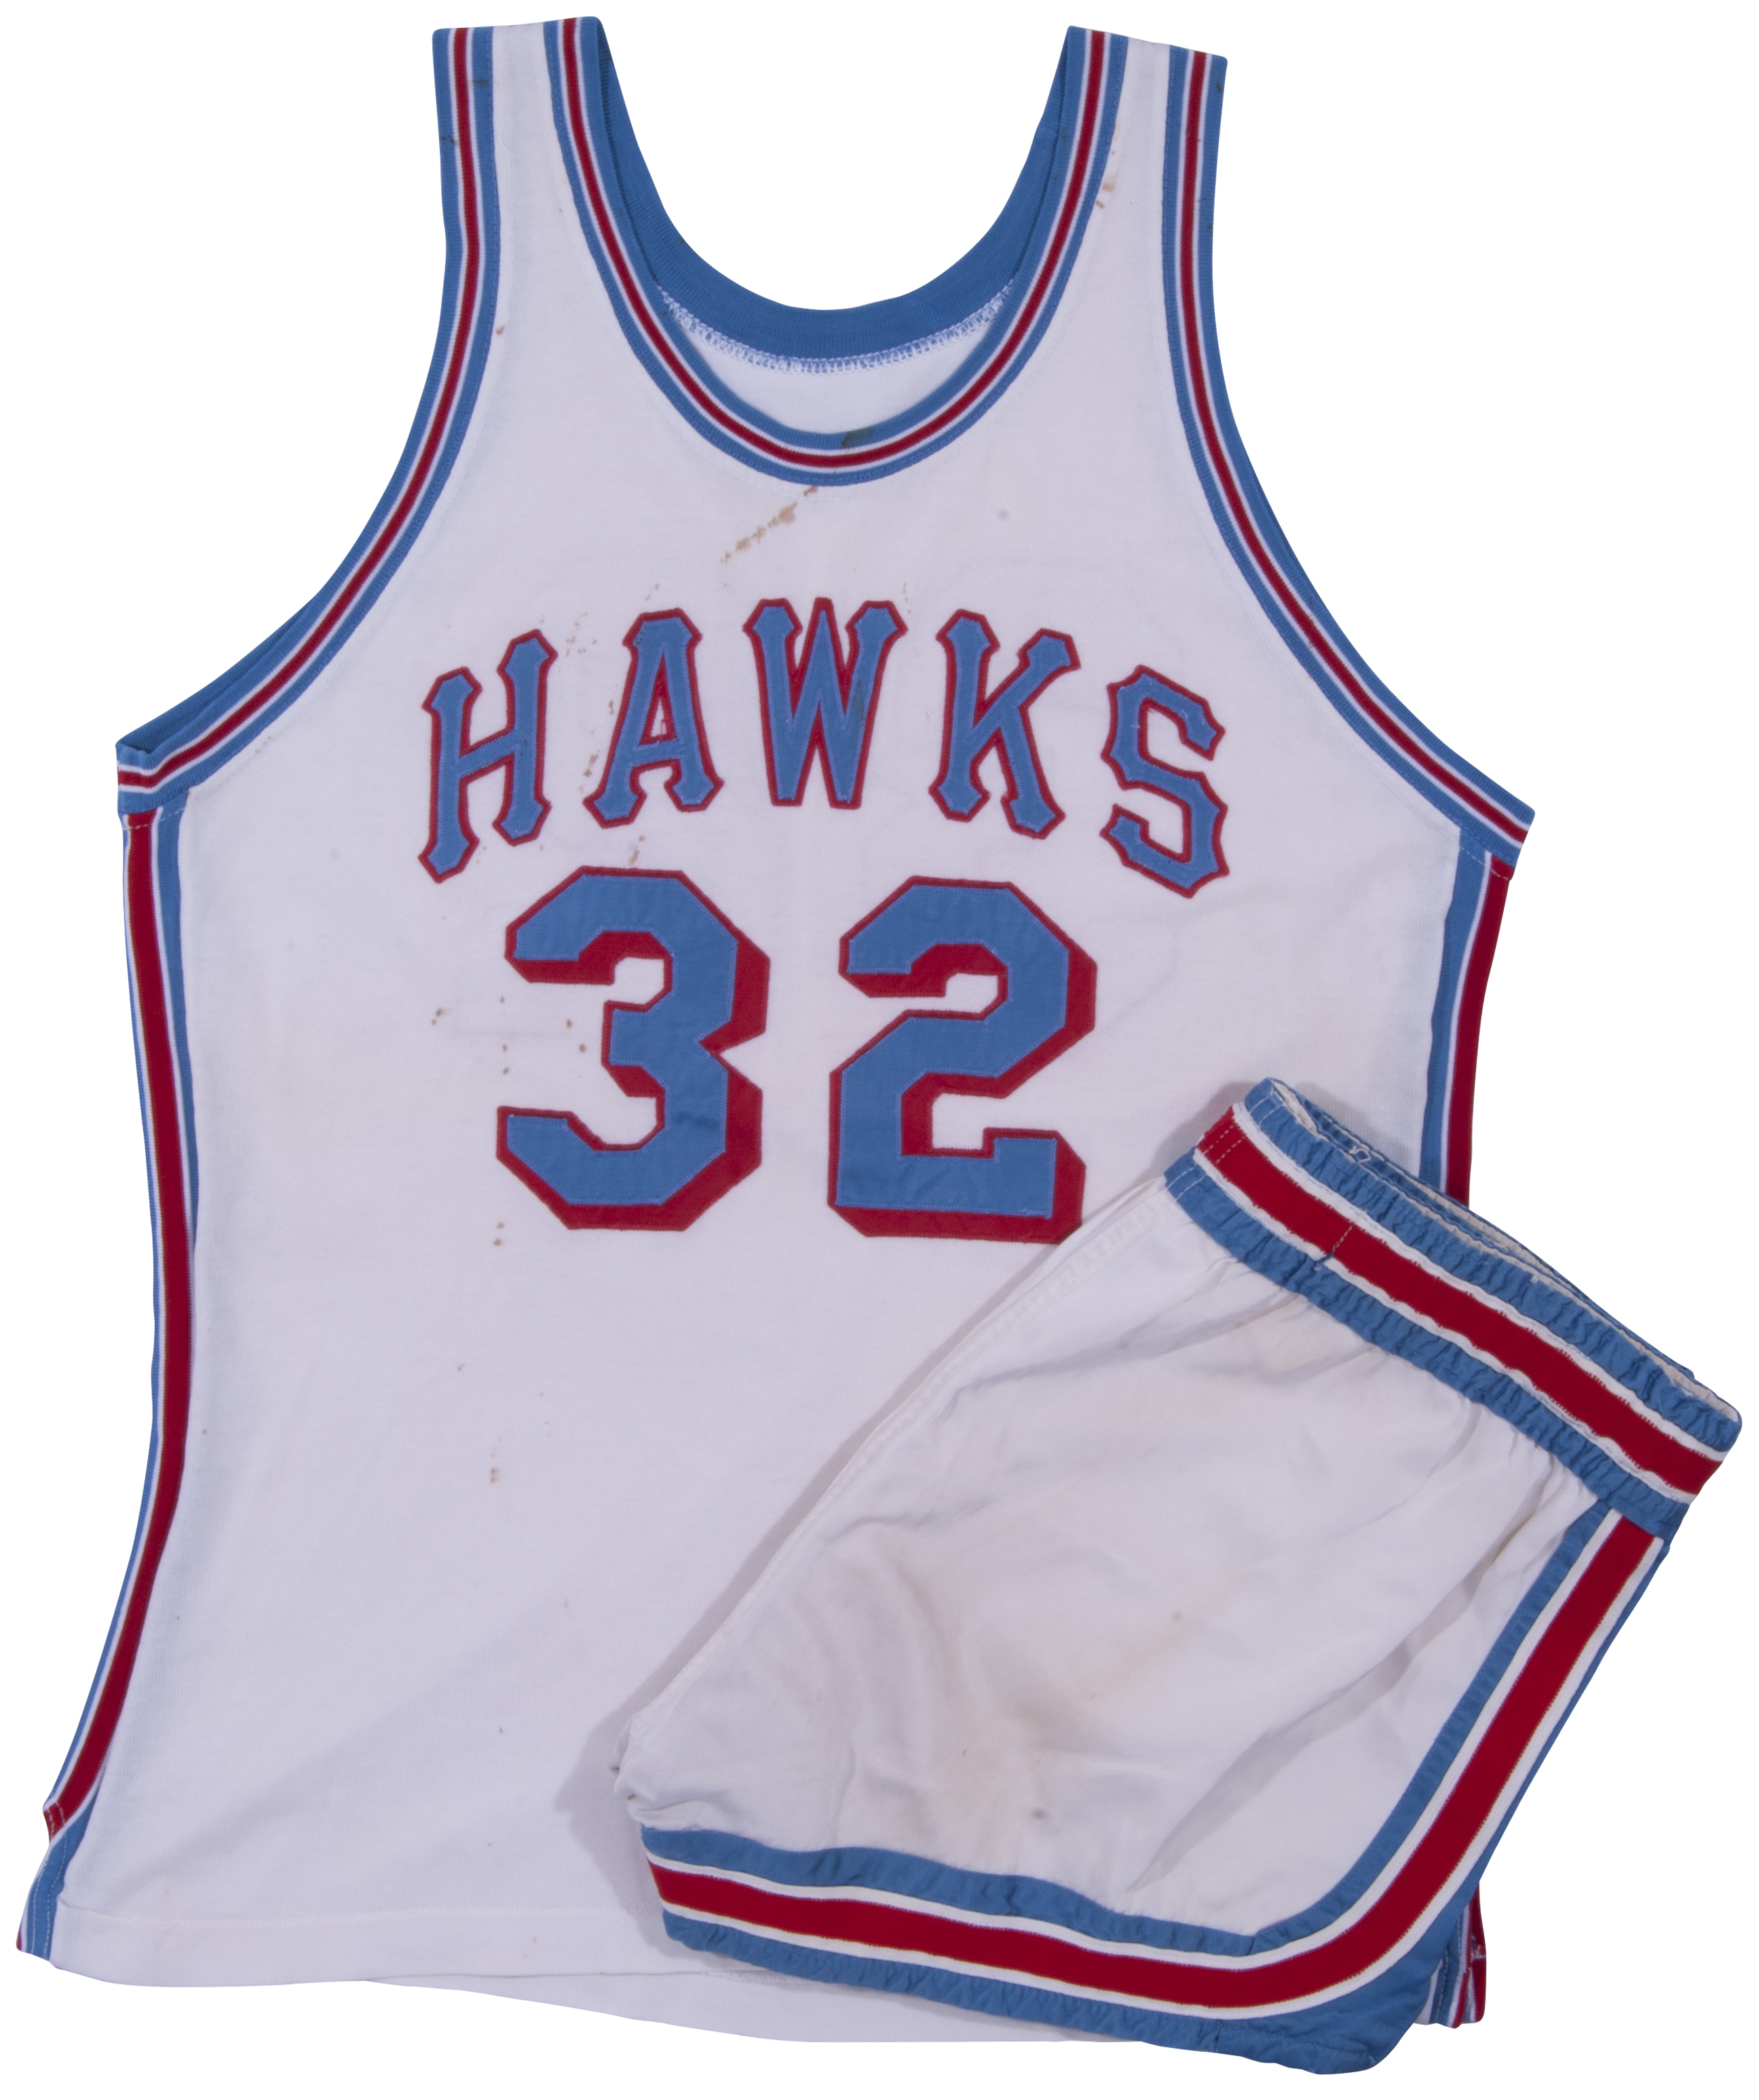 1970's Pete Maravich Signed Atlanta Hawks Jersey - The Only Known